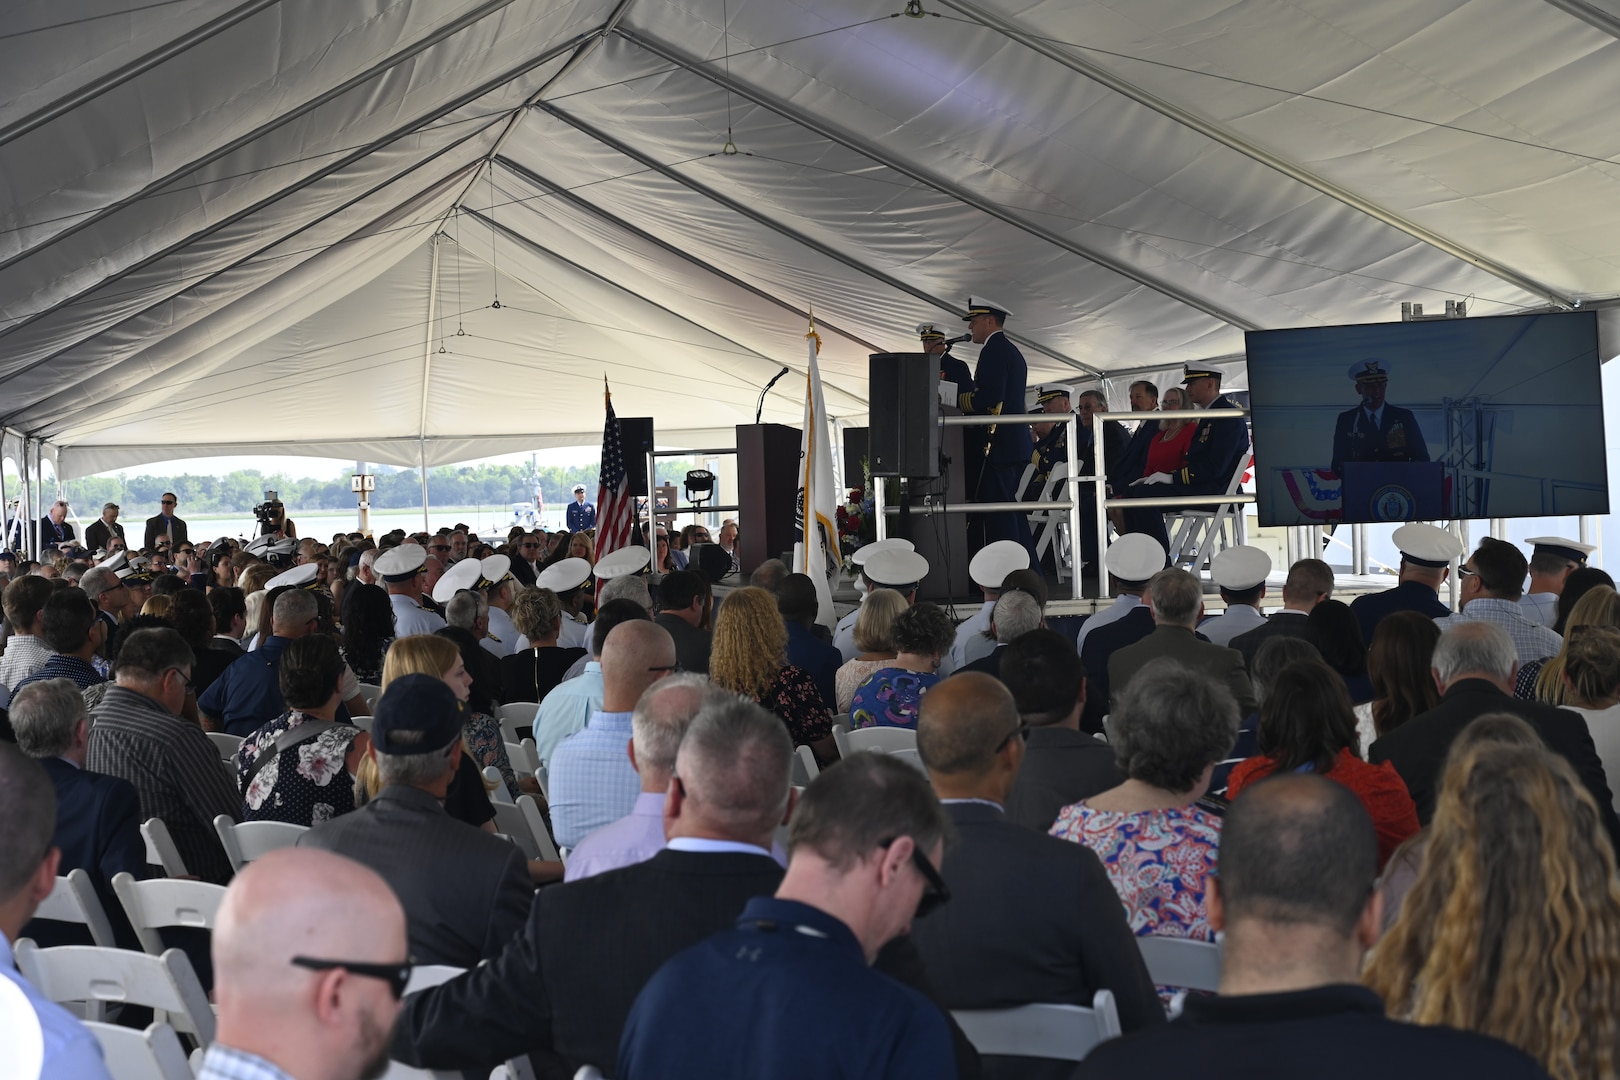 U.S. Coast Guard Capt. Timothy Sommella, commanding officer of the Coast Guard Cutter Calhoun (WMSL 759), addresses the audience during the ship’s commissioning ceremony in North Charleston, South Carolina, April 20, 2024. The Calhoun, which is named for the first Master Chief Petty Officer of the Coast Guard, Charles Calhoun, was commissioned into service as the 10th National Security Cutter. (U.S. Coast Guard photo by Senior Chief Petty Officer Nick Ameen)